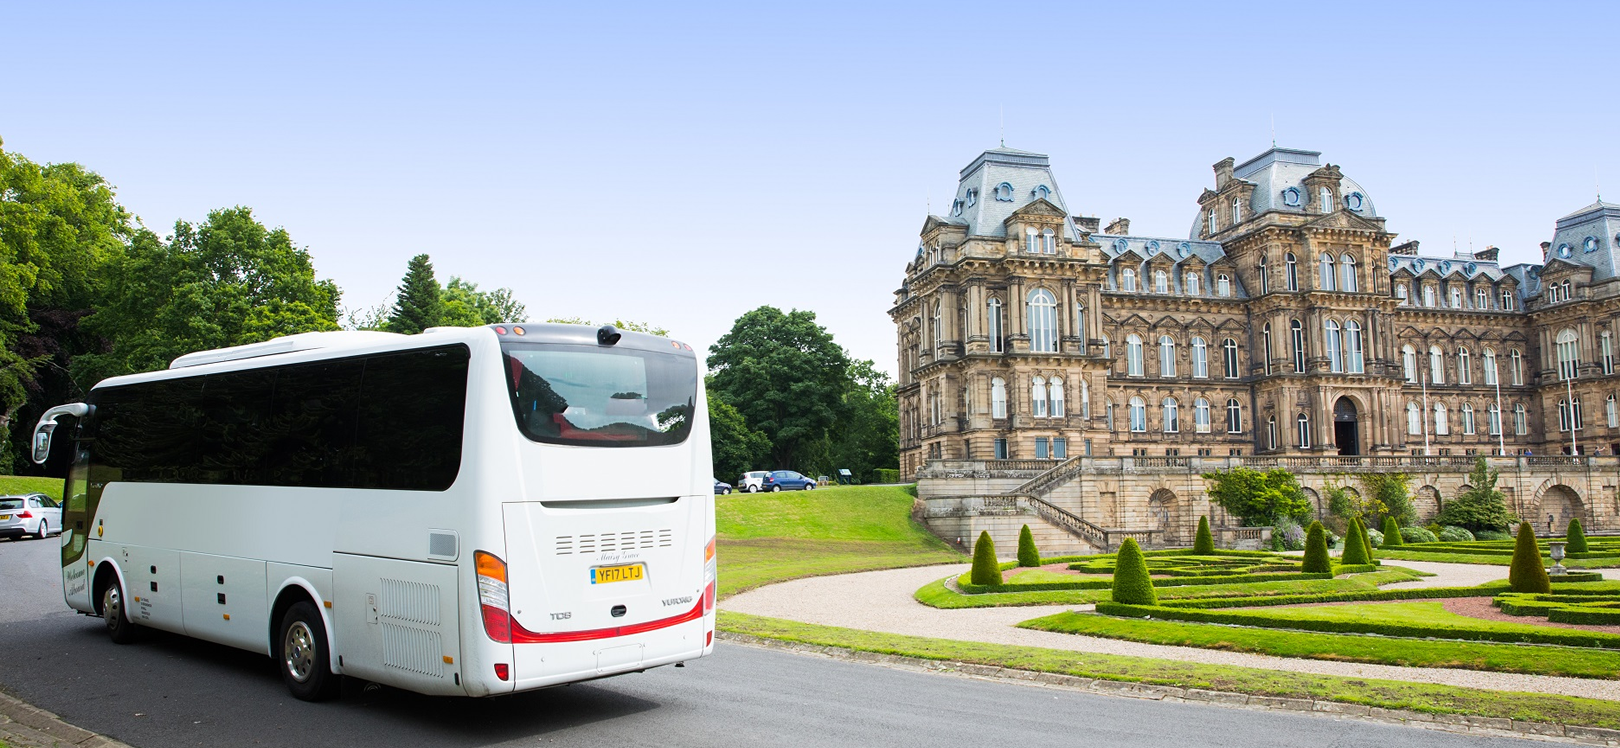 A coach outside of the Bowes Museum